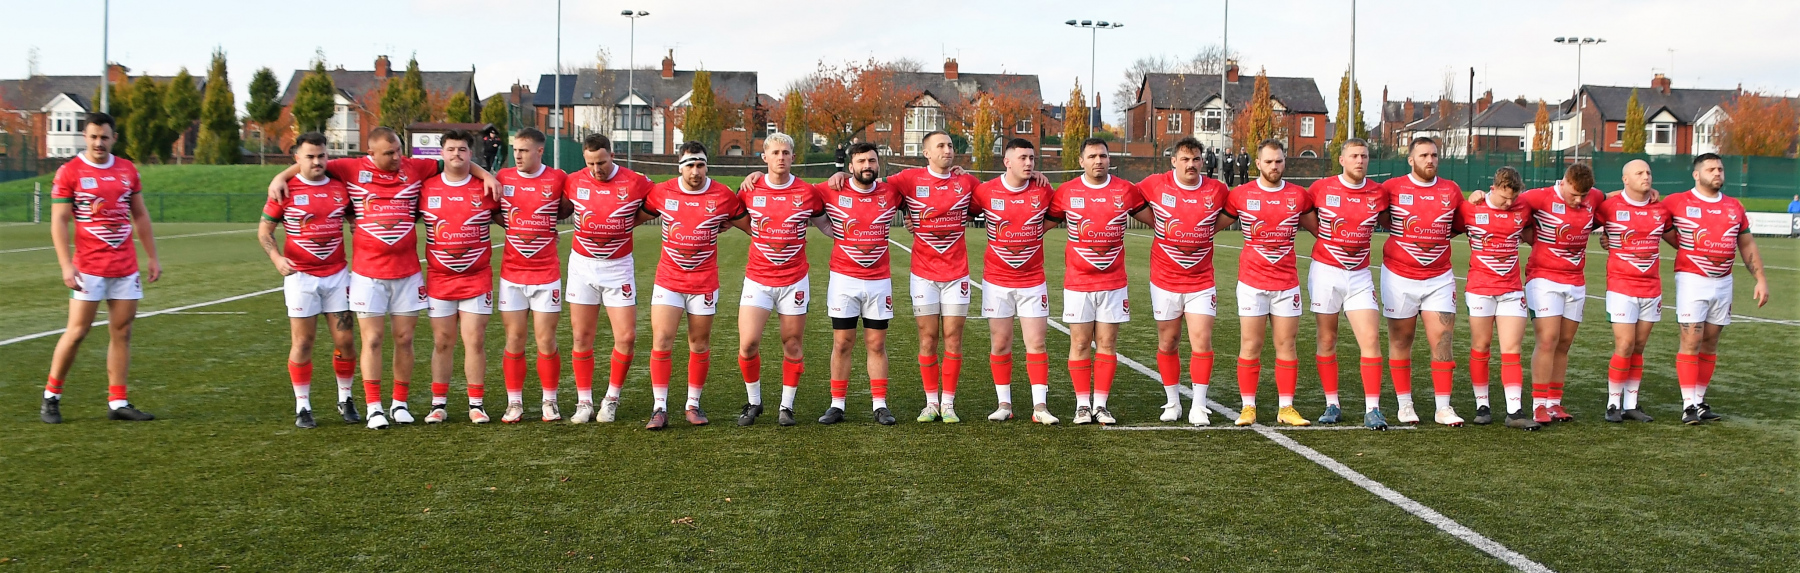 Wales Dragonhearts line up before facing England (pic - Ben Challis)